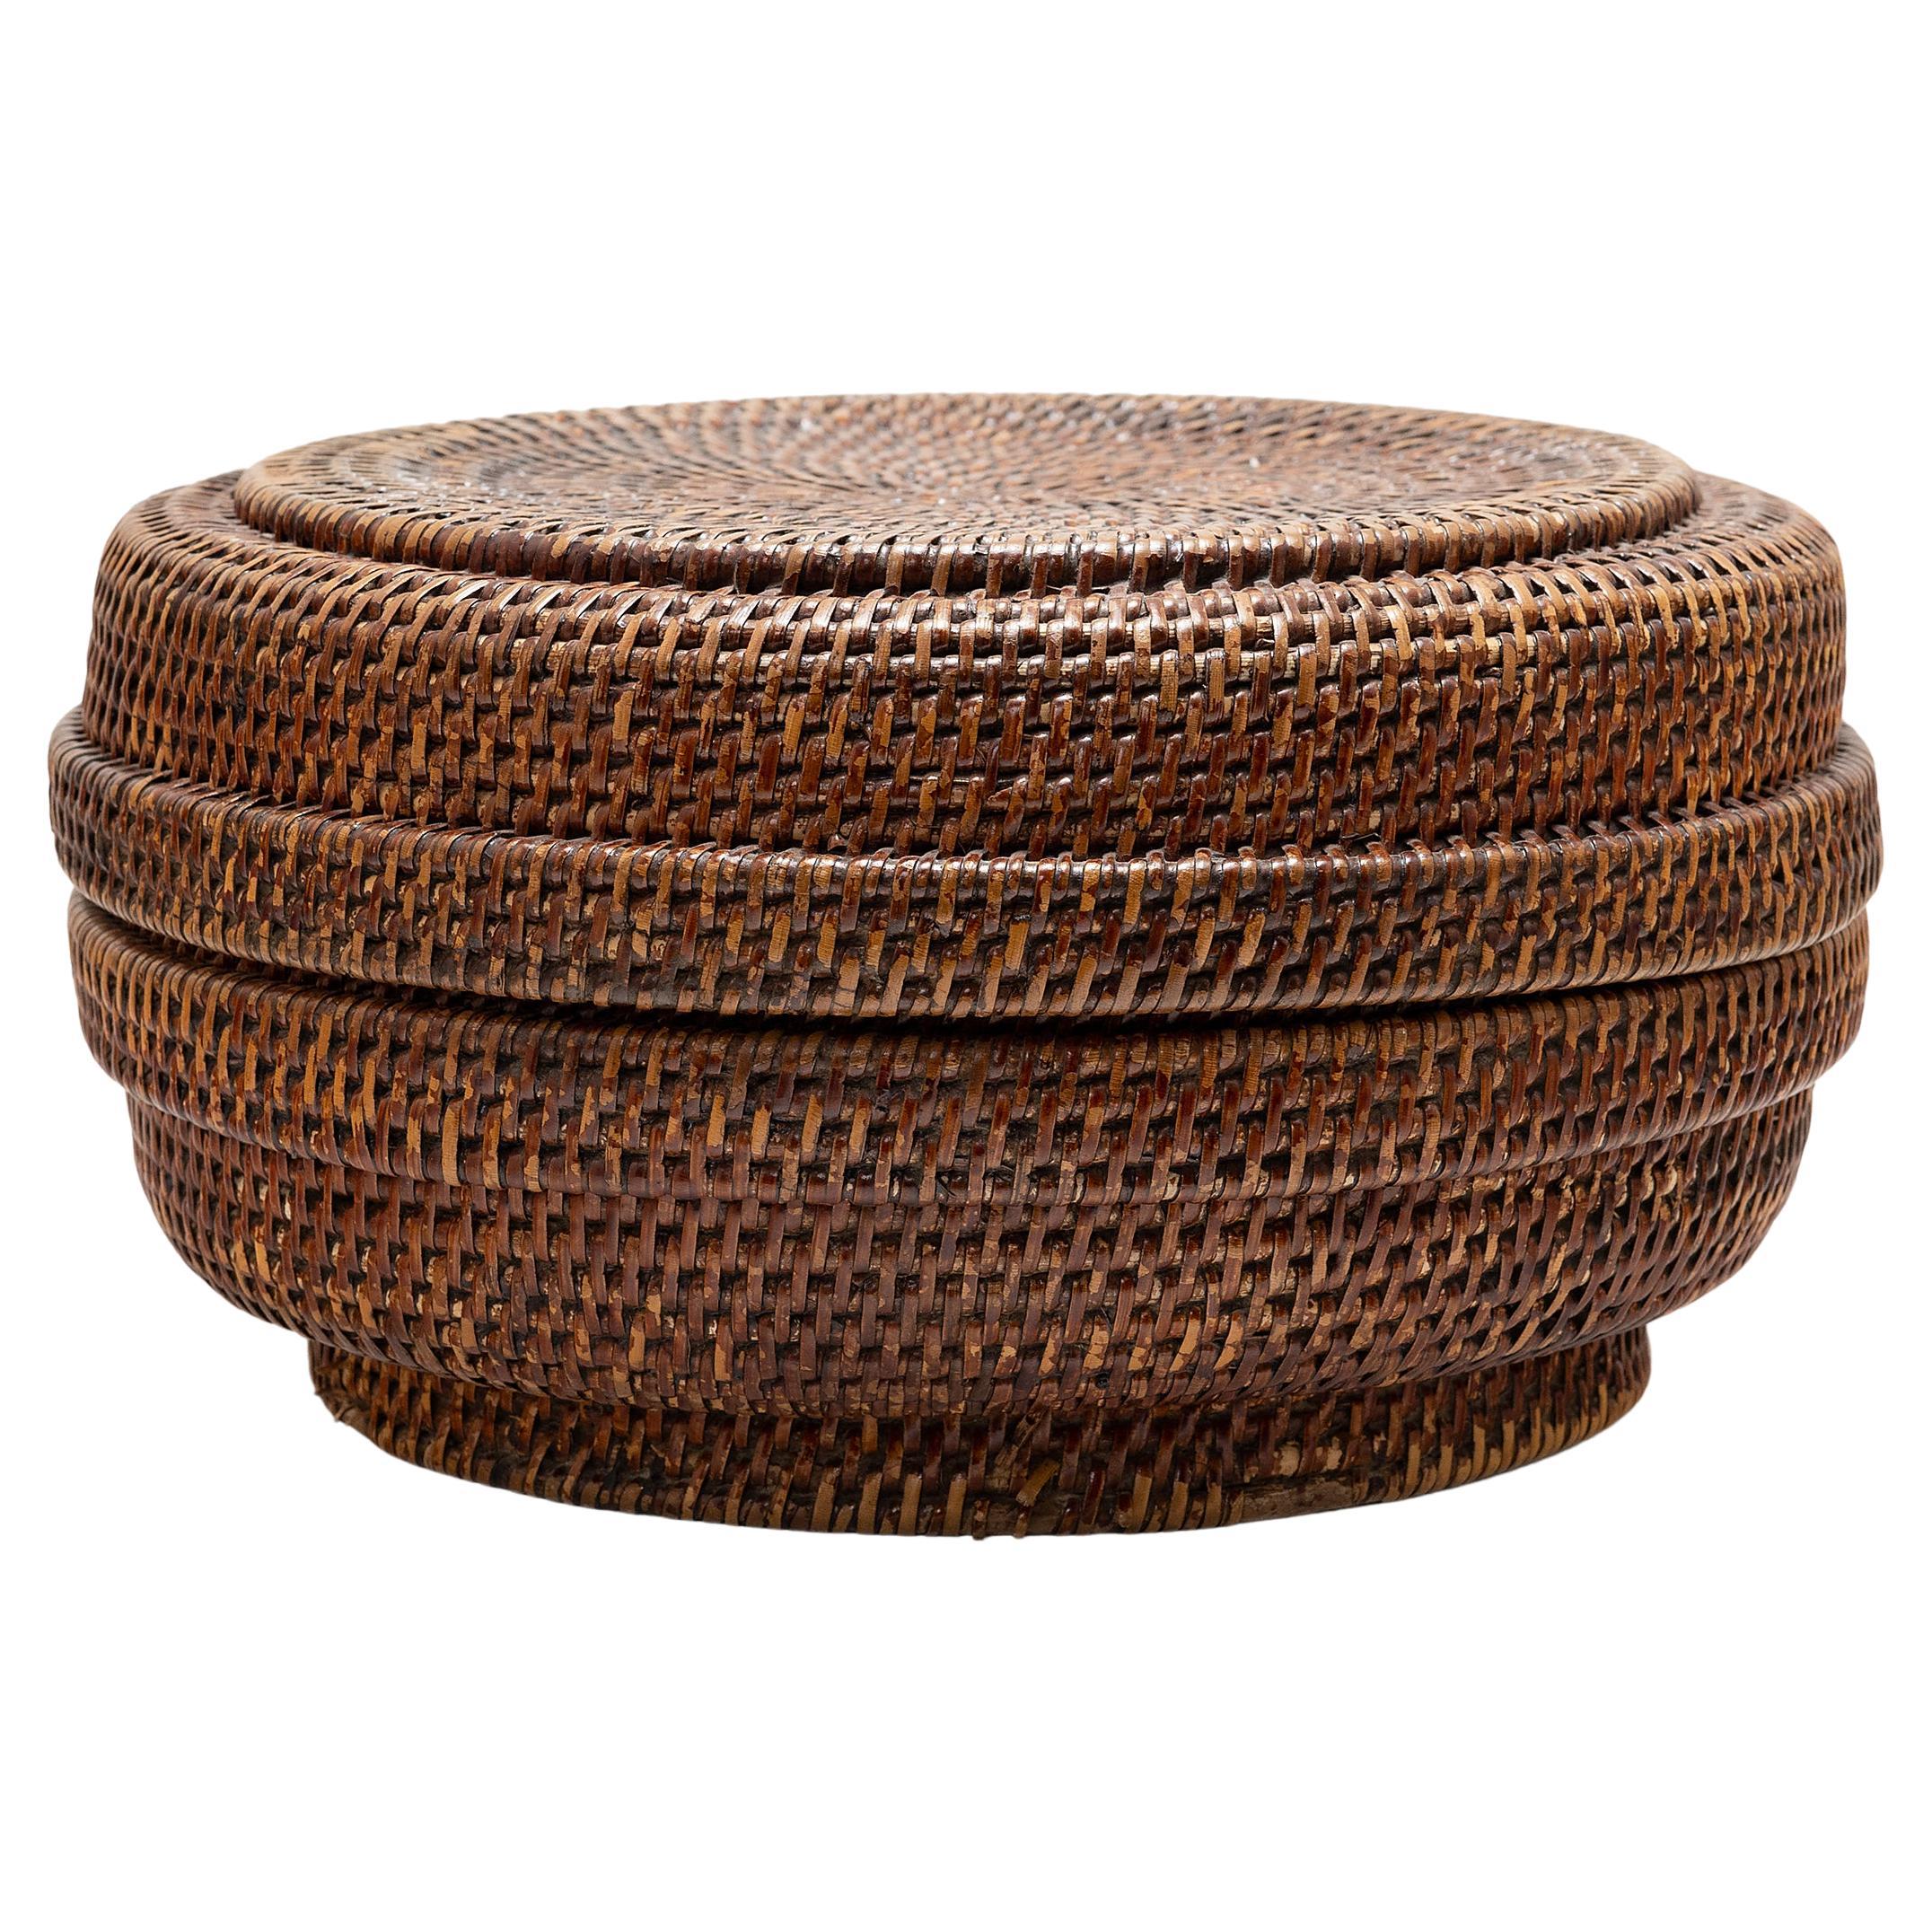 Round Woven Chinese Box, c. 1850 For Sale